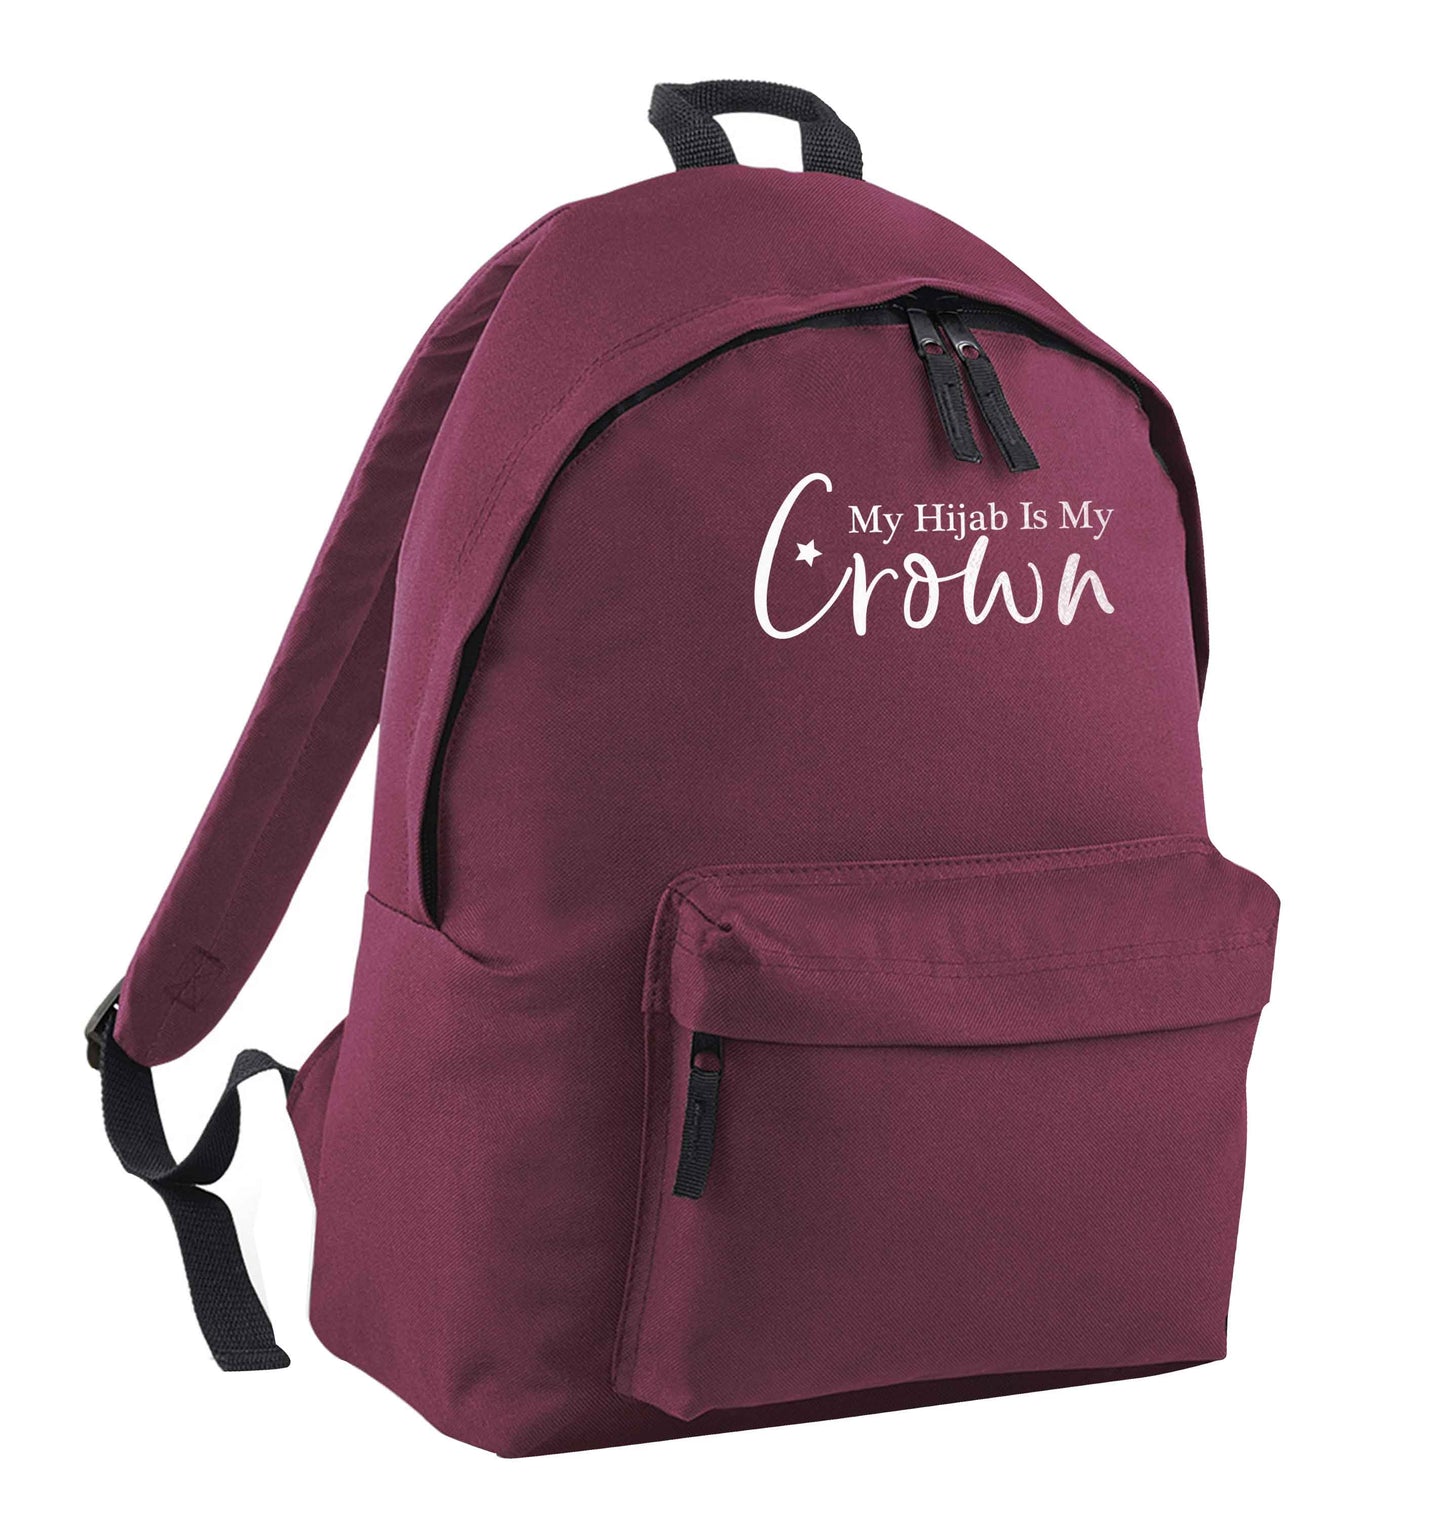 My hijab is my crown maroon adults backpack